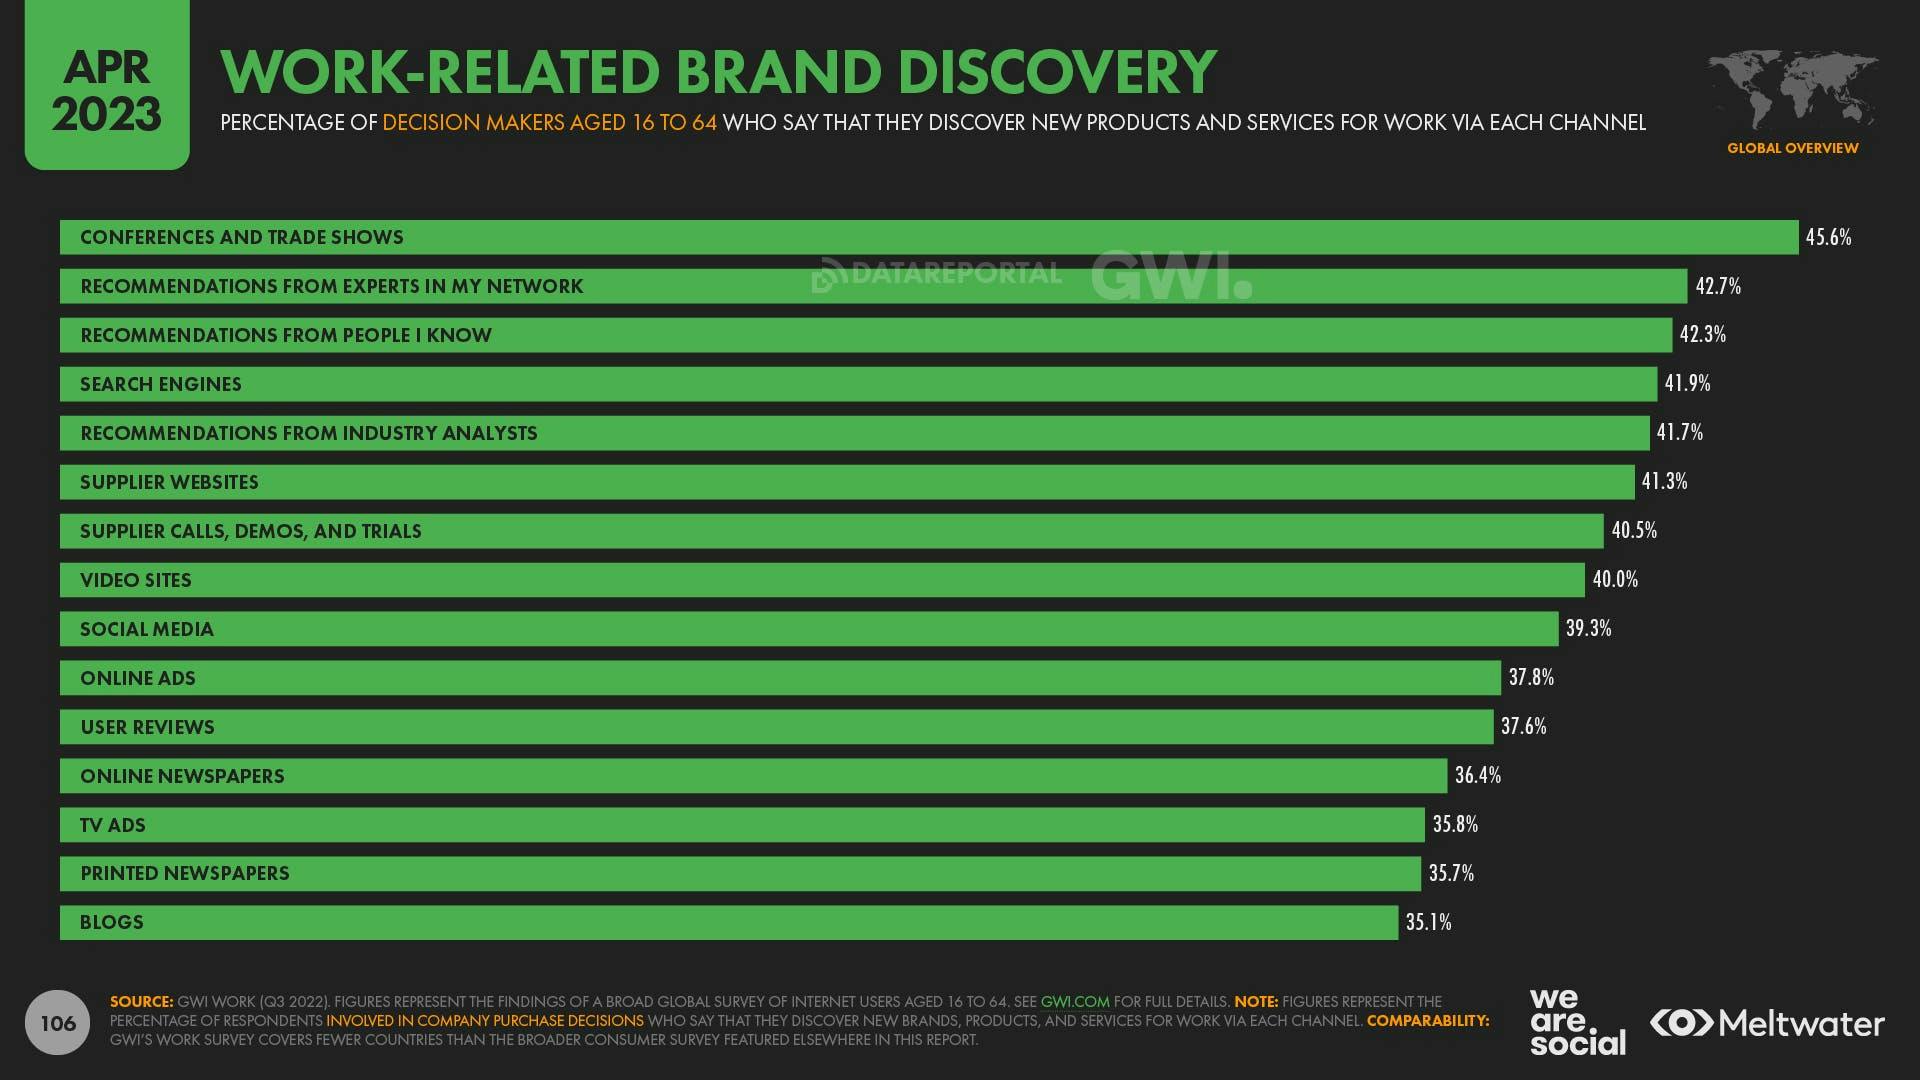 April 2023 Global State of Digital Report: Work-Related Brand Discovery